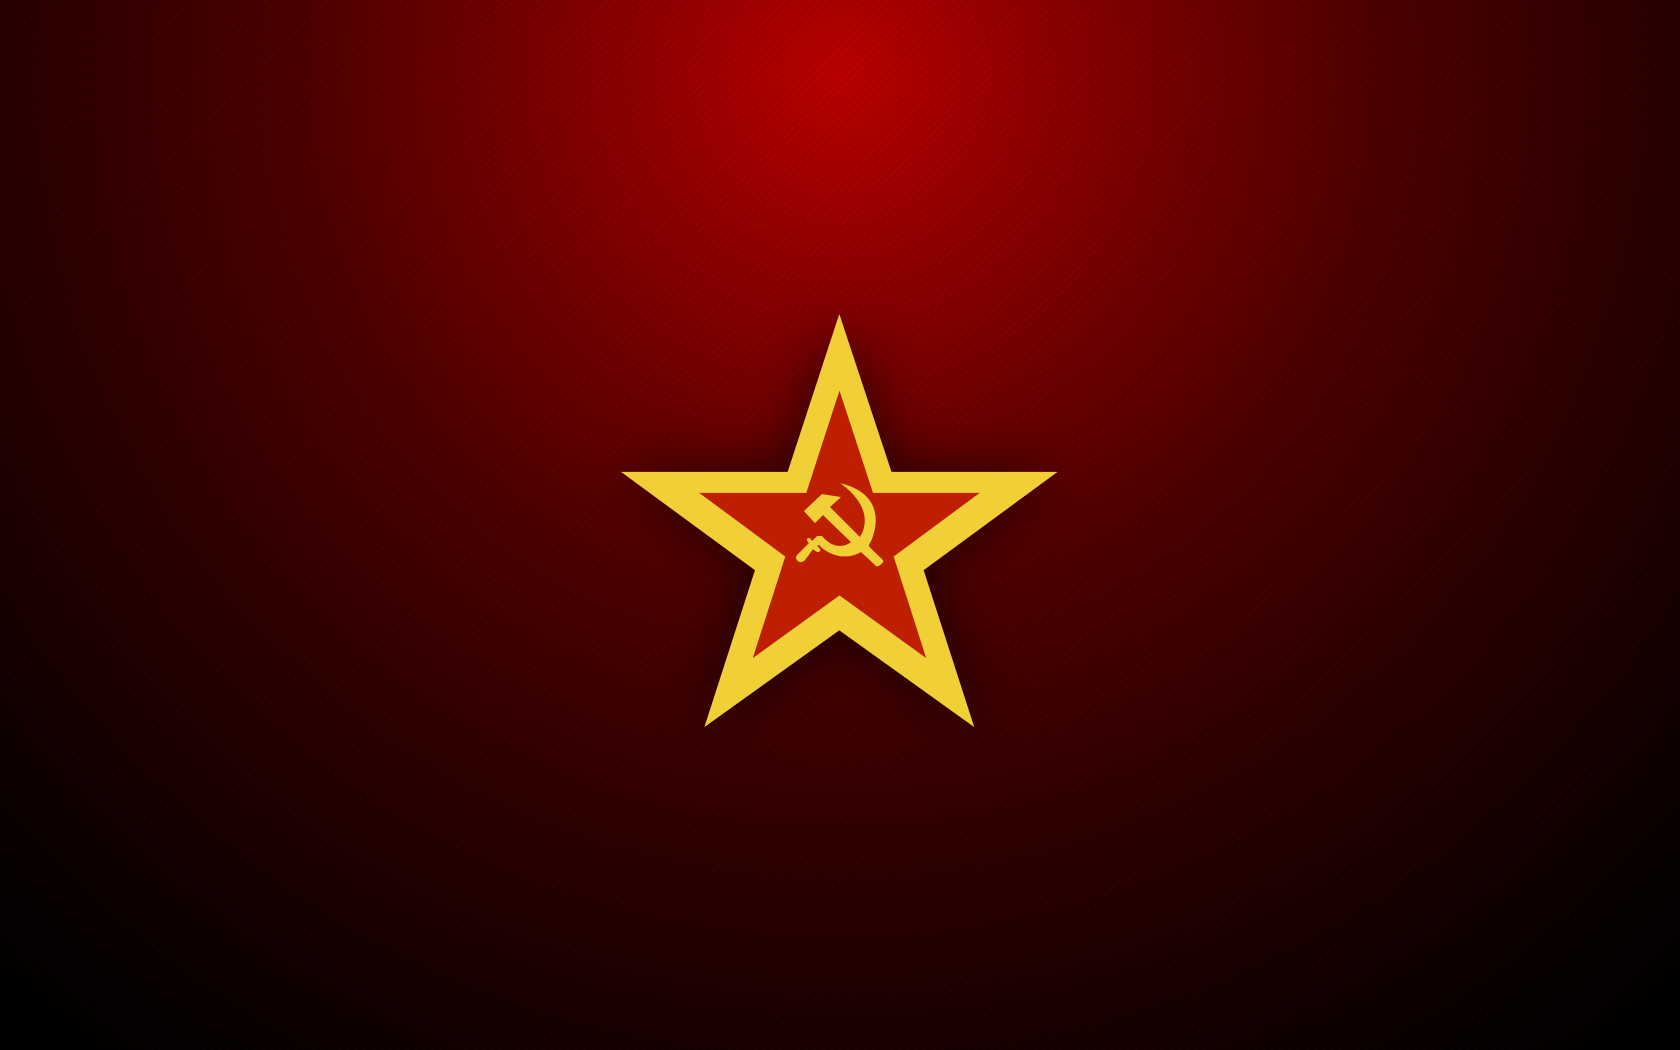 General 1680x1050 red communism simple background minimalism hammer and sickle red star gradient USSR